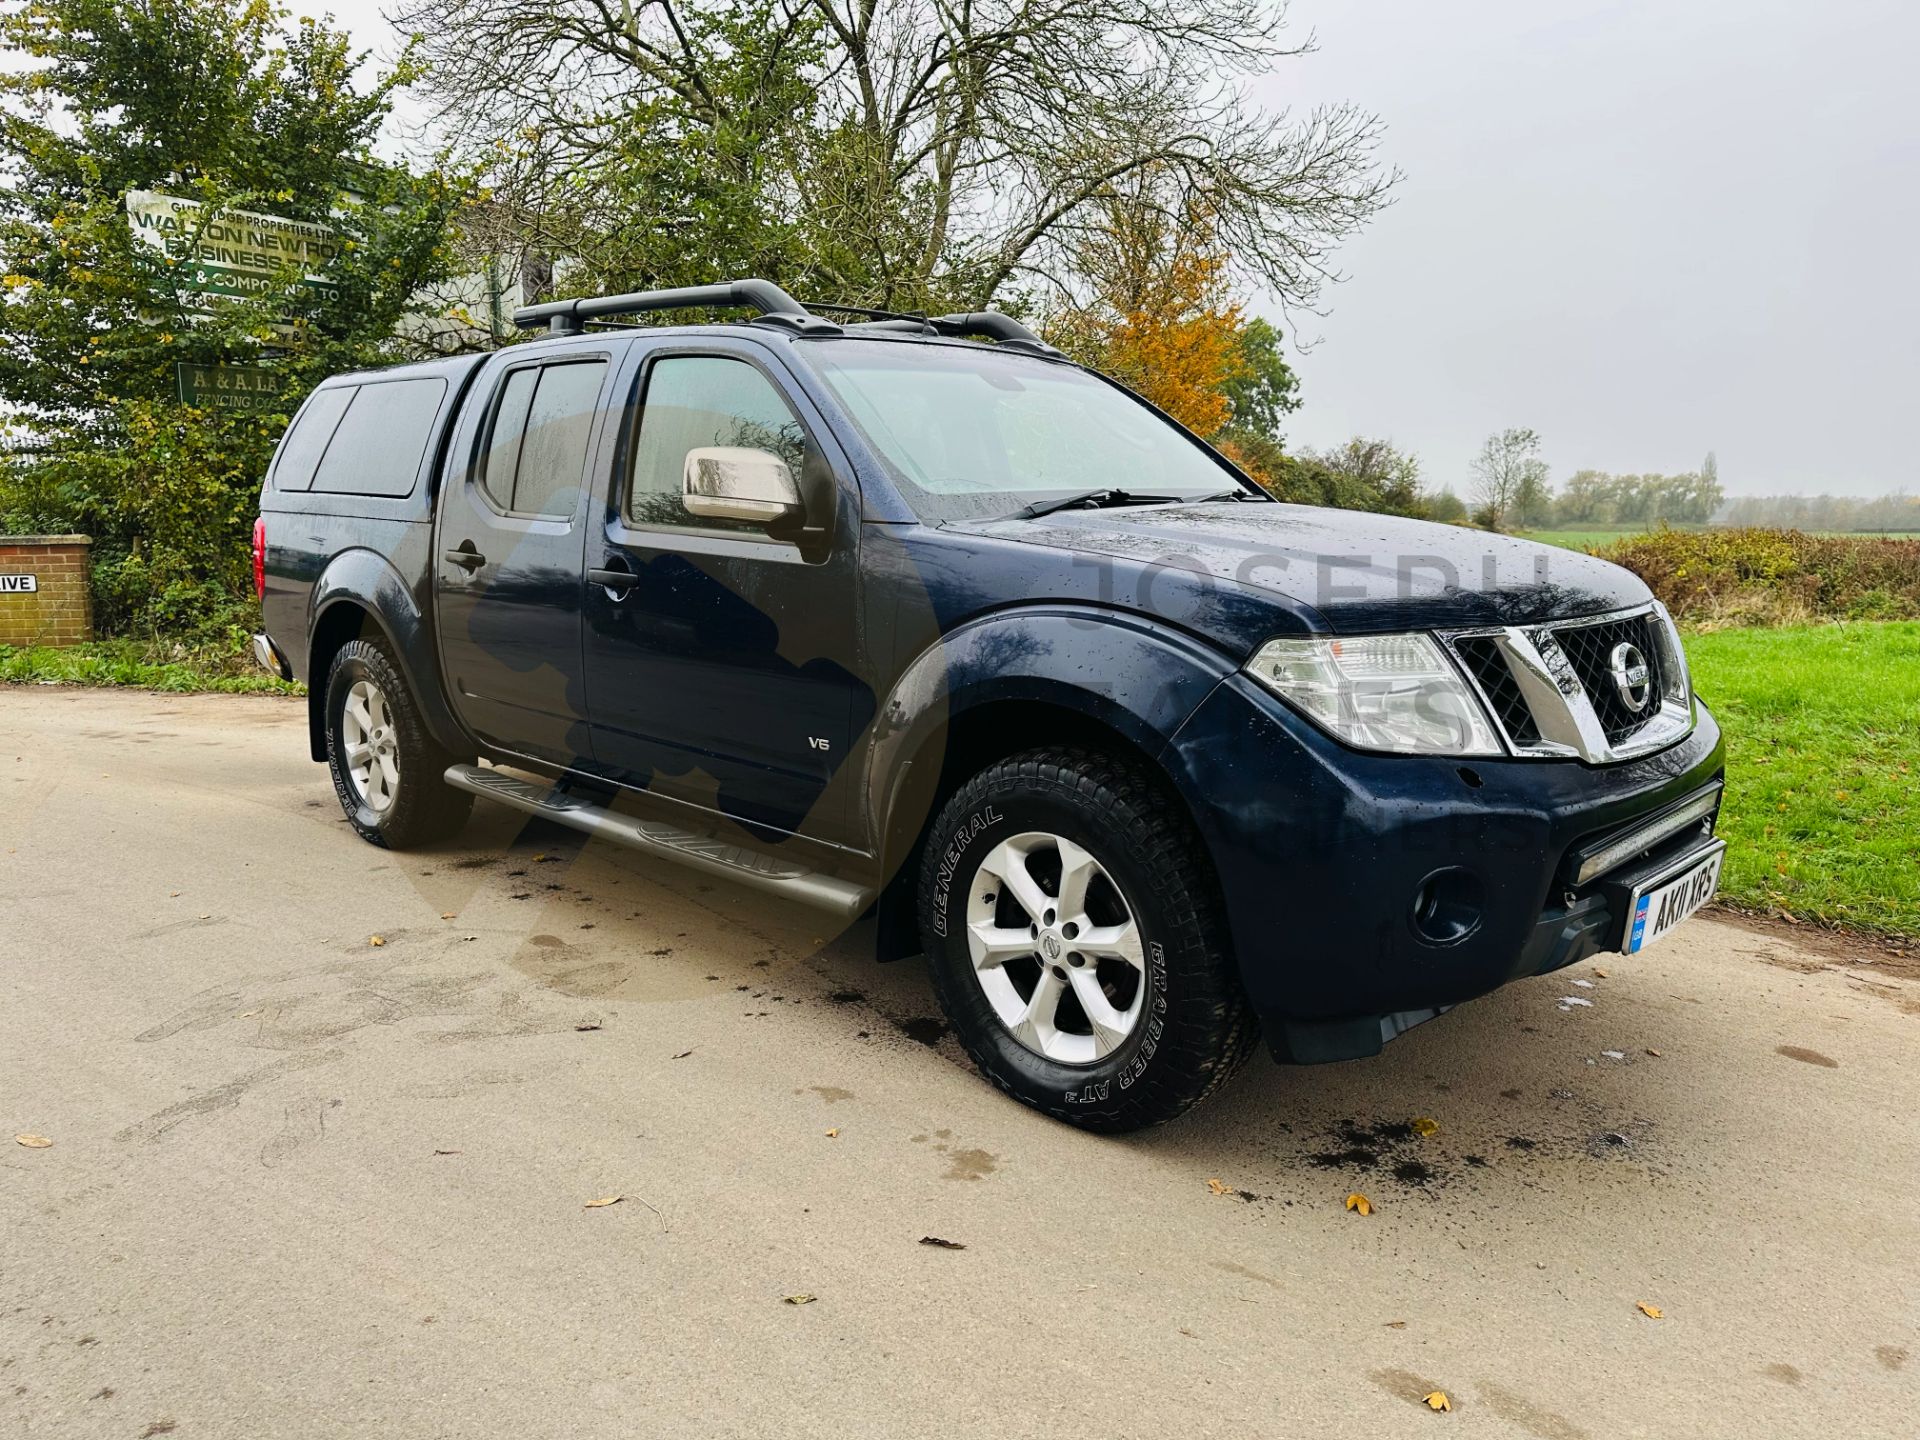 (ON SALE)NISSAN NAVARA *OUTLAW EDITION* 3.0 V6 TURBO DIESEL AUTOMATIC DOUBLE CAB PICKUP - 11 REG - Image 2 of 43